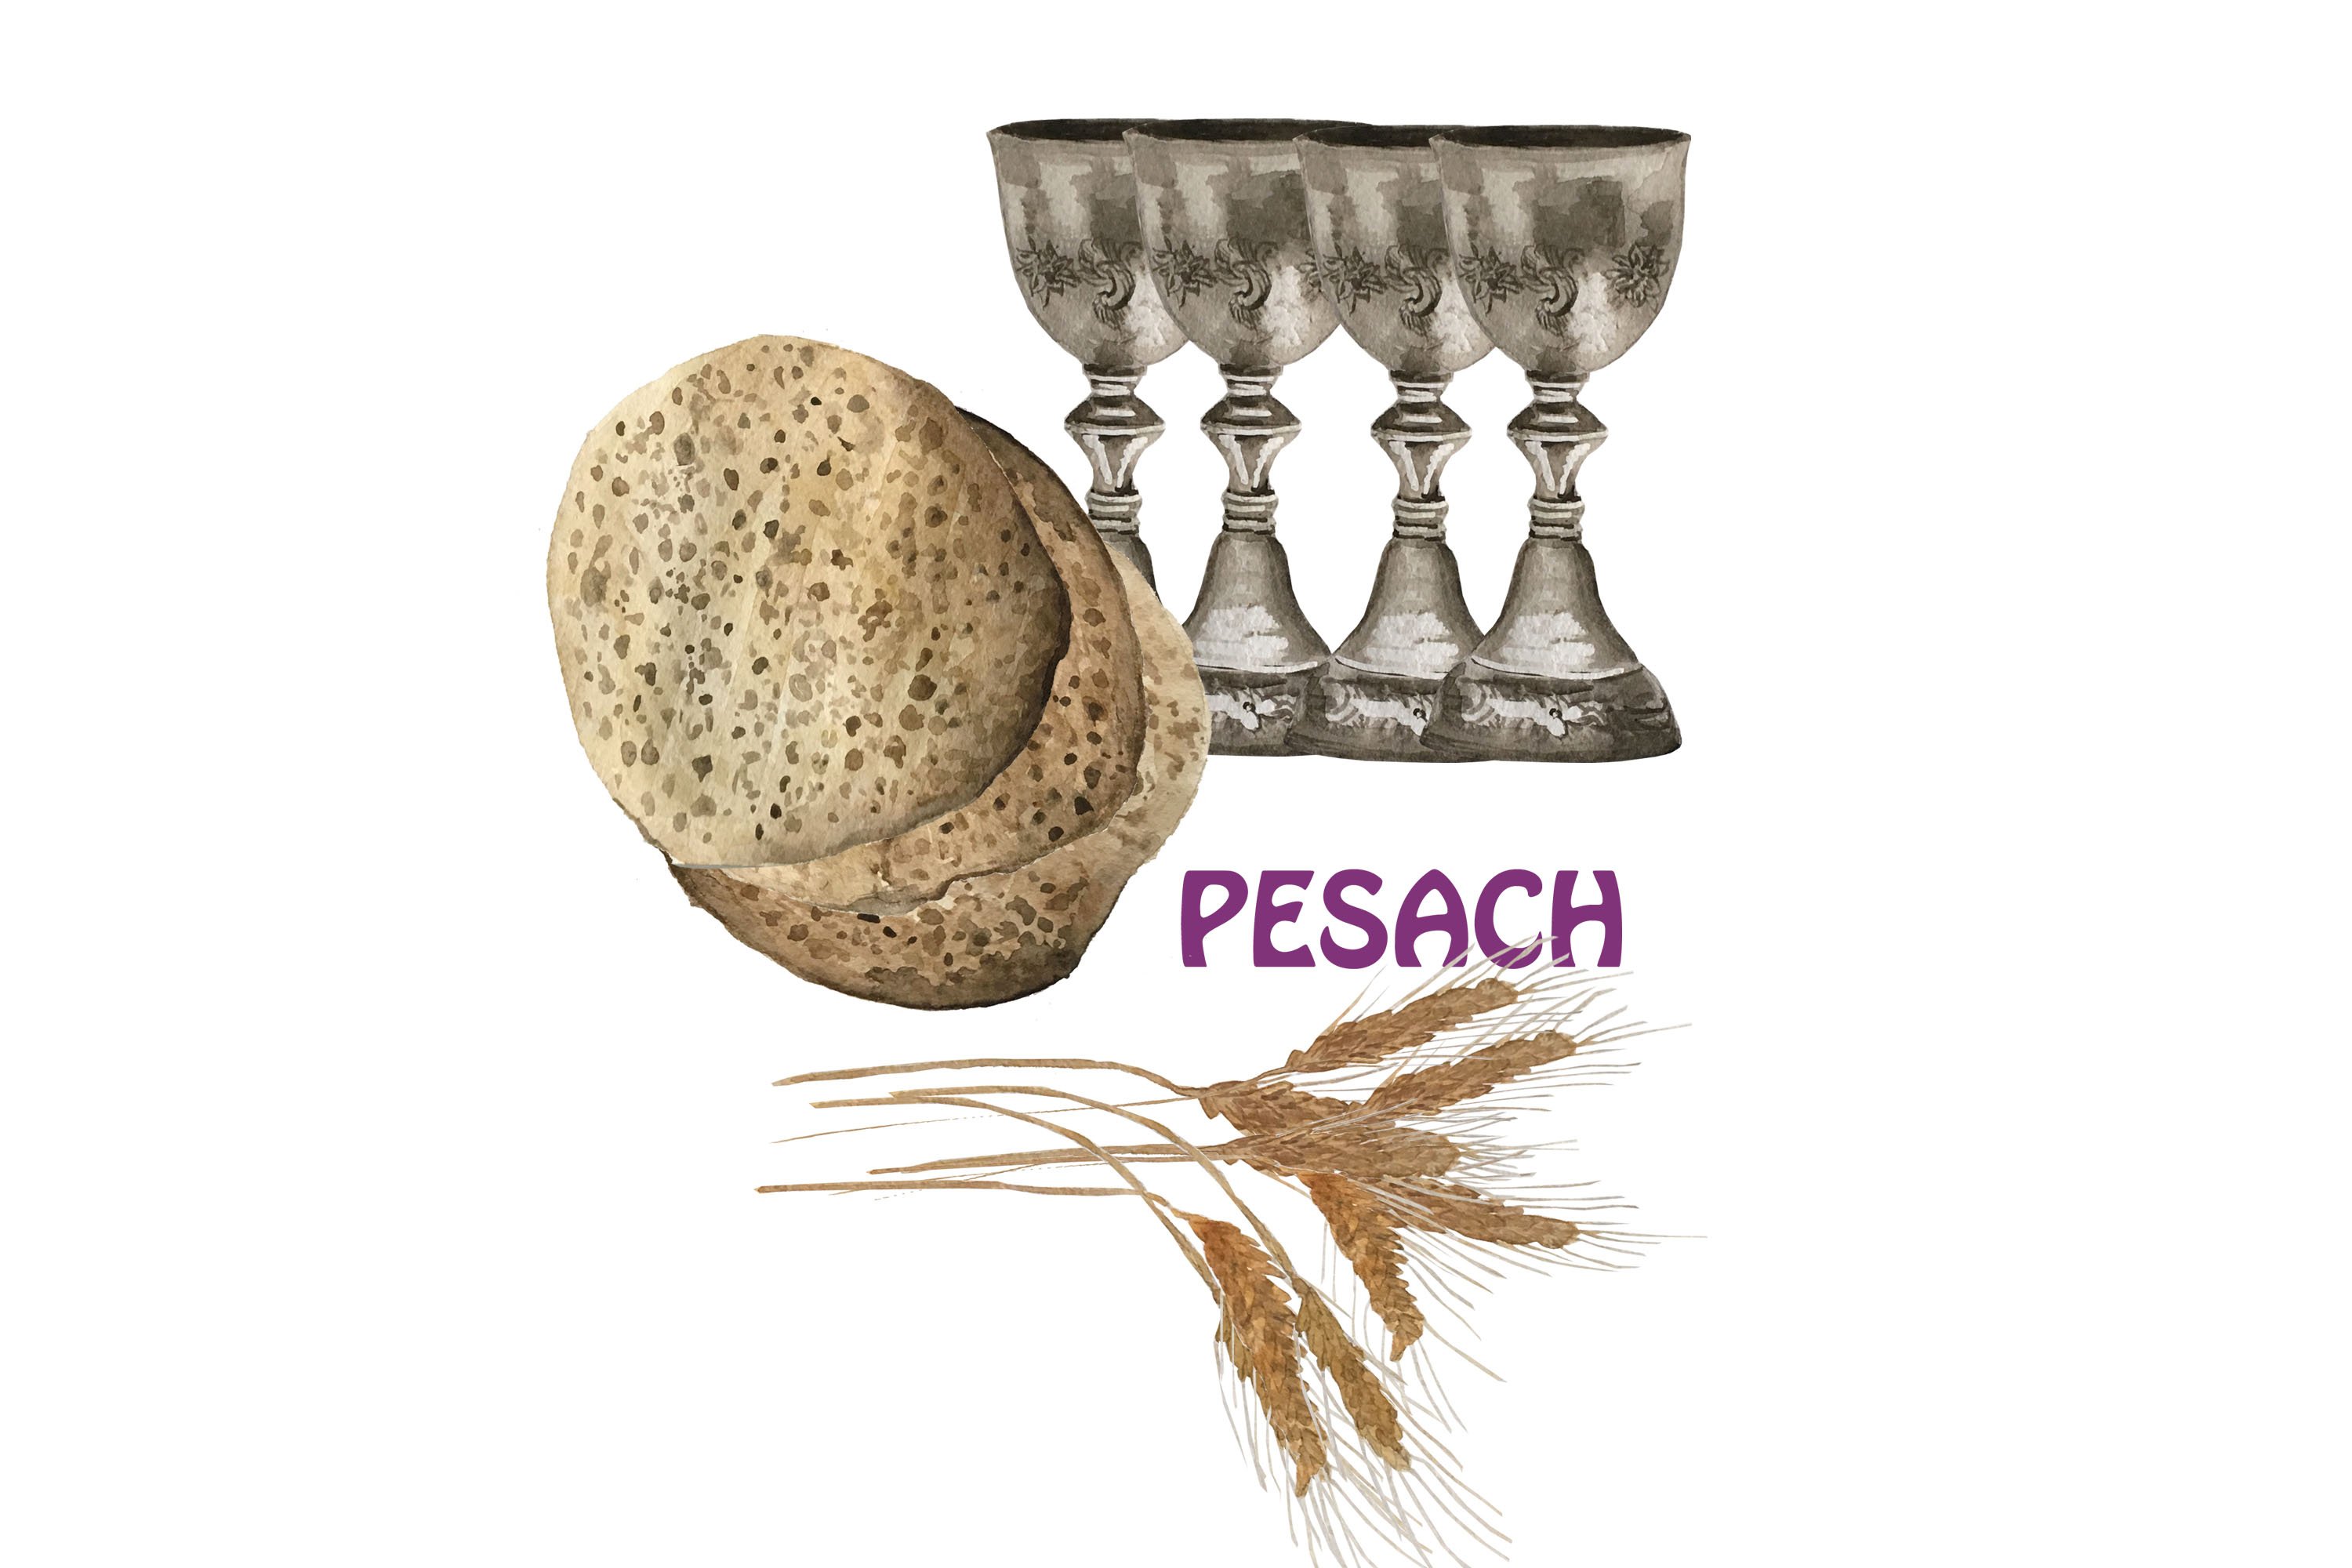 Pesach in a high quality.